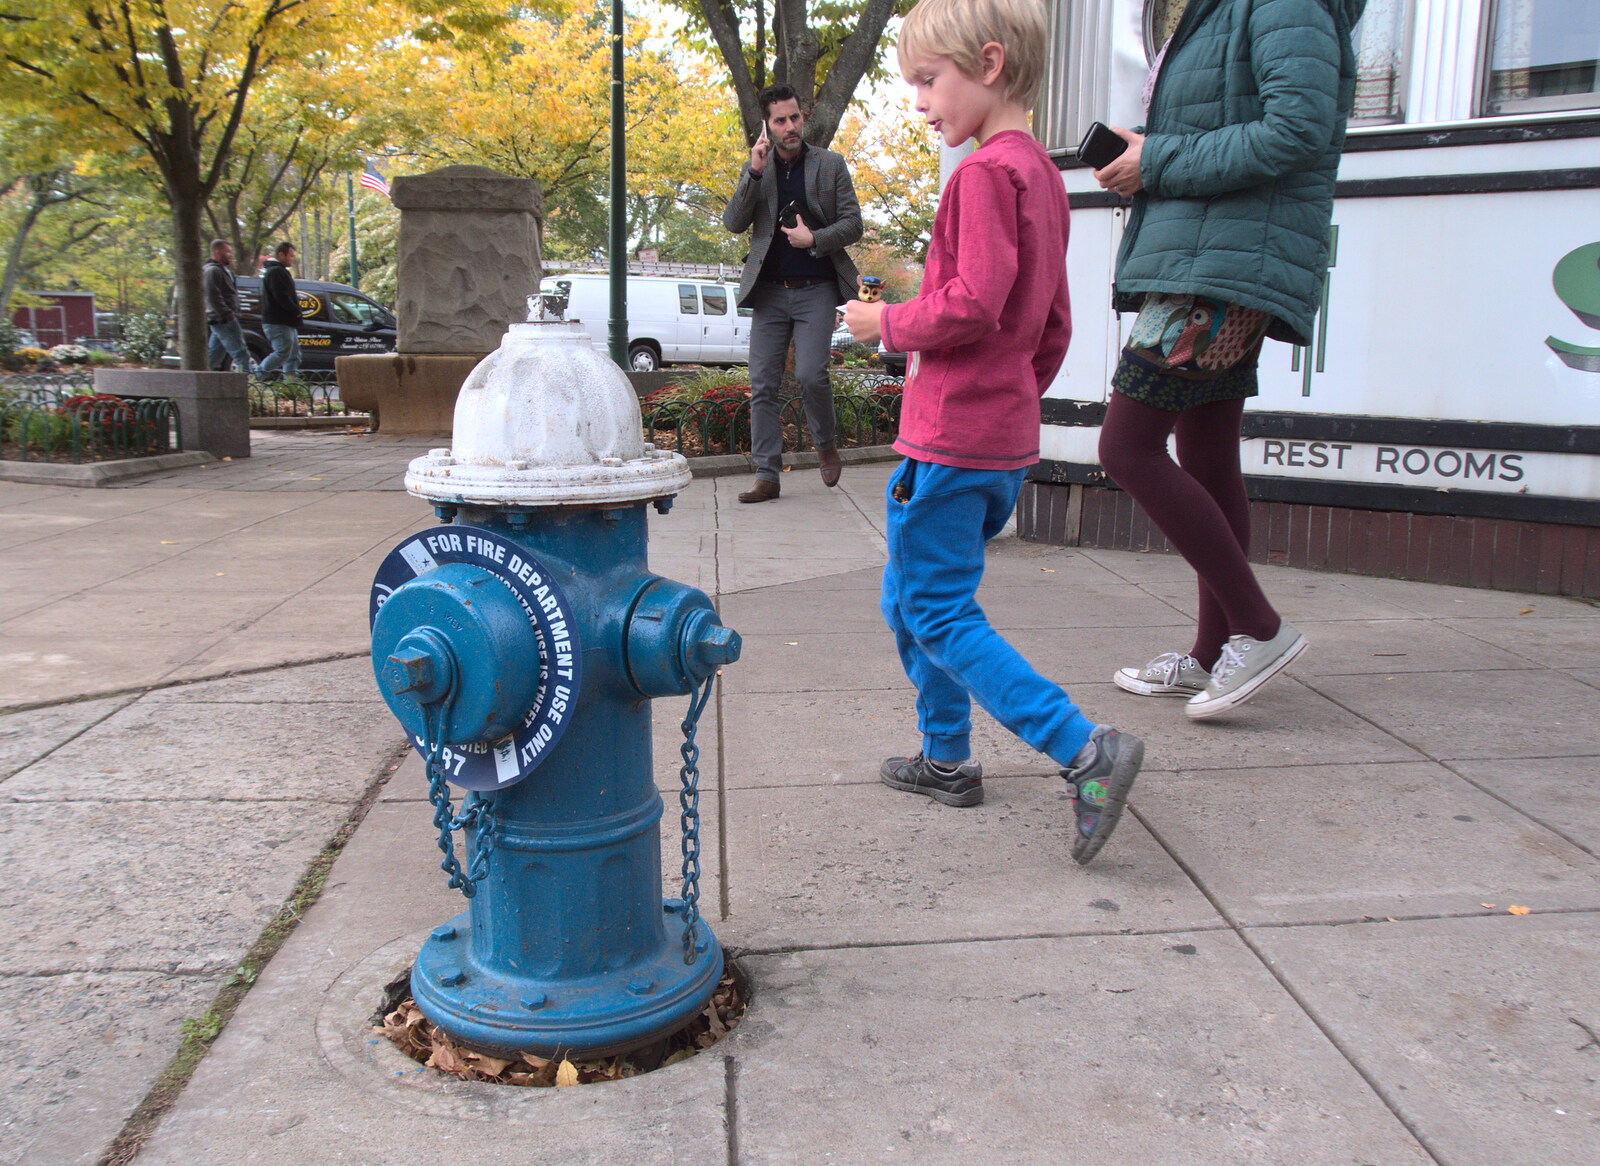 Harry wanders past a fire hydrant from Times Square, USS Intrepid and the High Line, Manhattan, New York - 25th October 2018